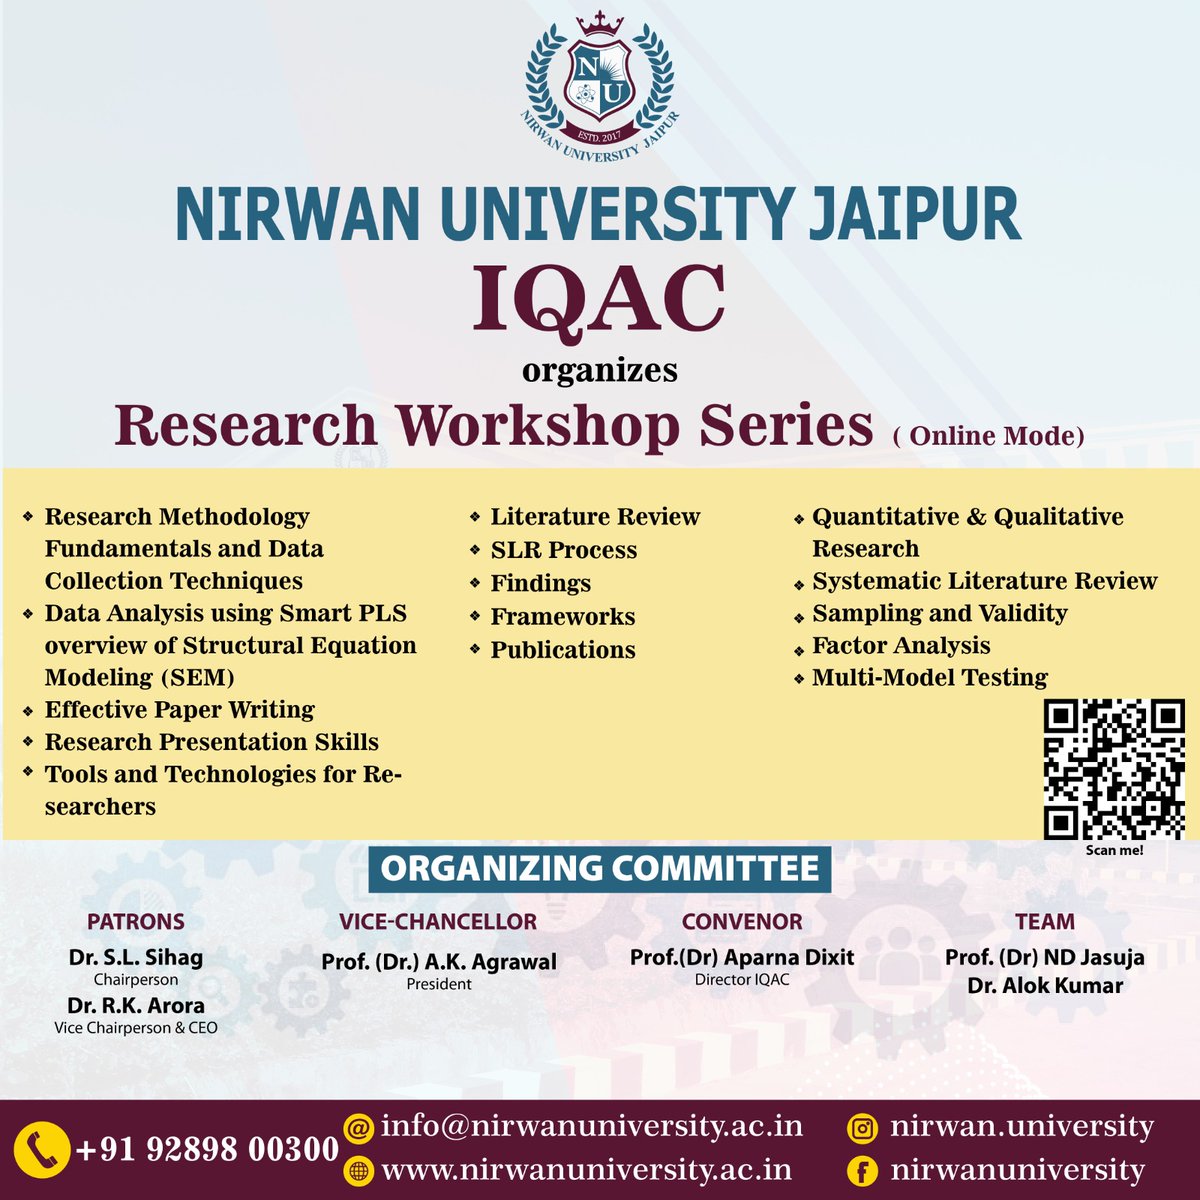 IQAC at NUJ is organizing a Research Workshop Series ( online mode) aimed at enhancing capabilities through quality initiatives.The workshop, slated to commence on 5th April 2024 is tailored for faculty members and research scholars to augment their research comprehension.